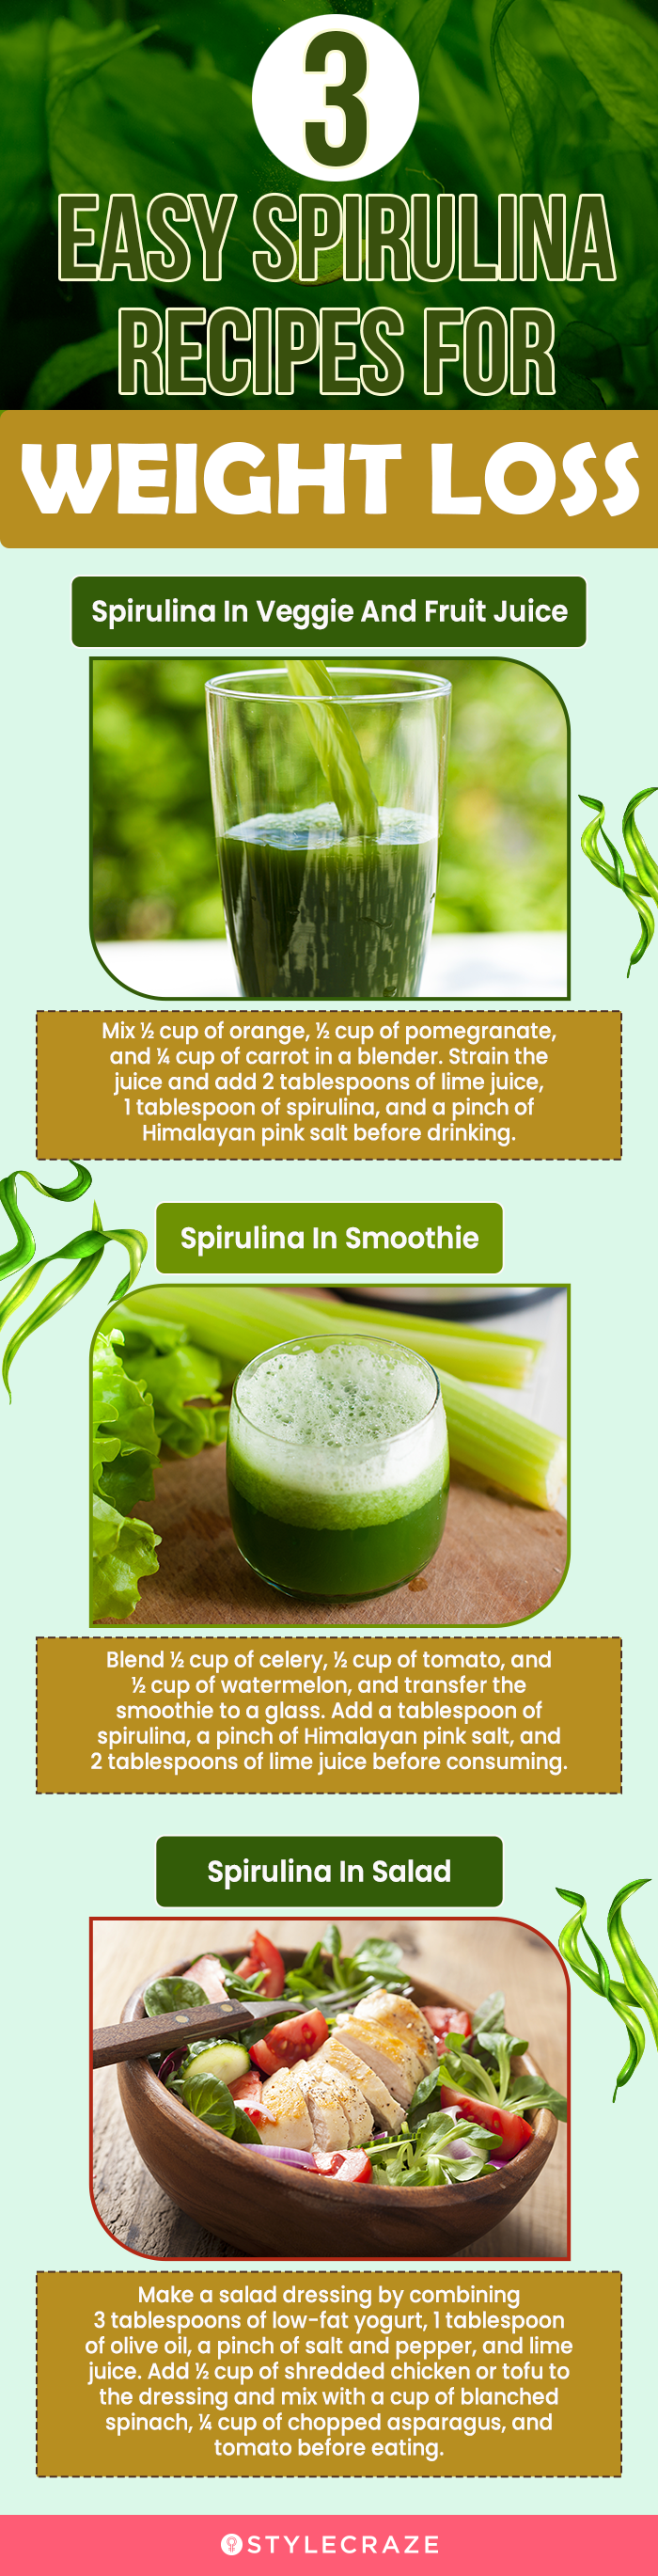 3 easy spirulina recipes for weight loss (infographic)